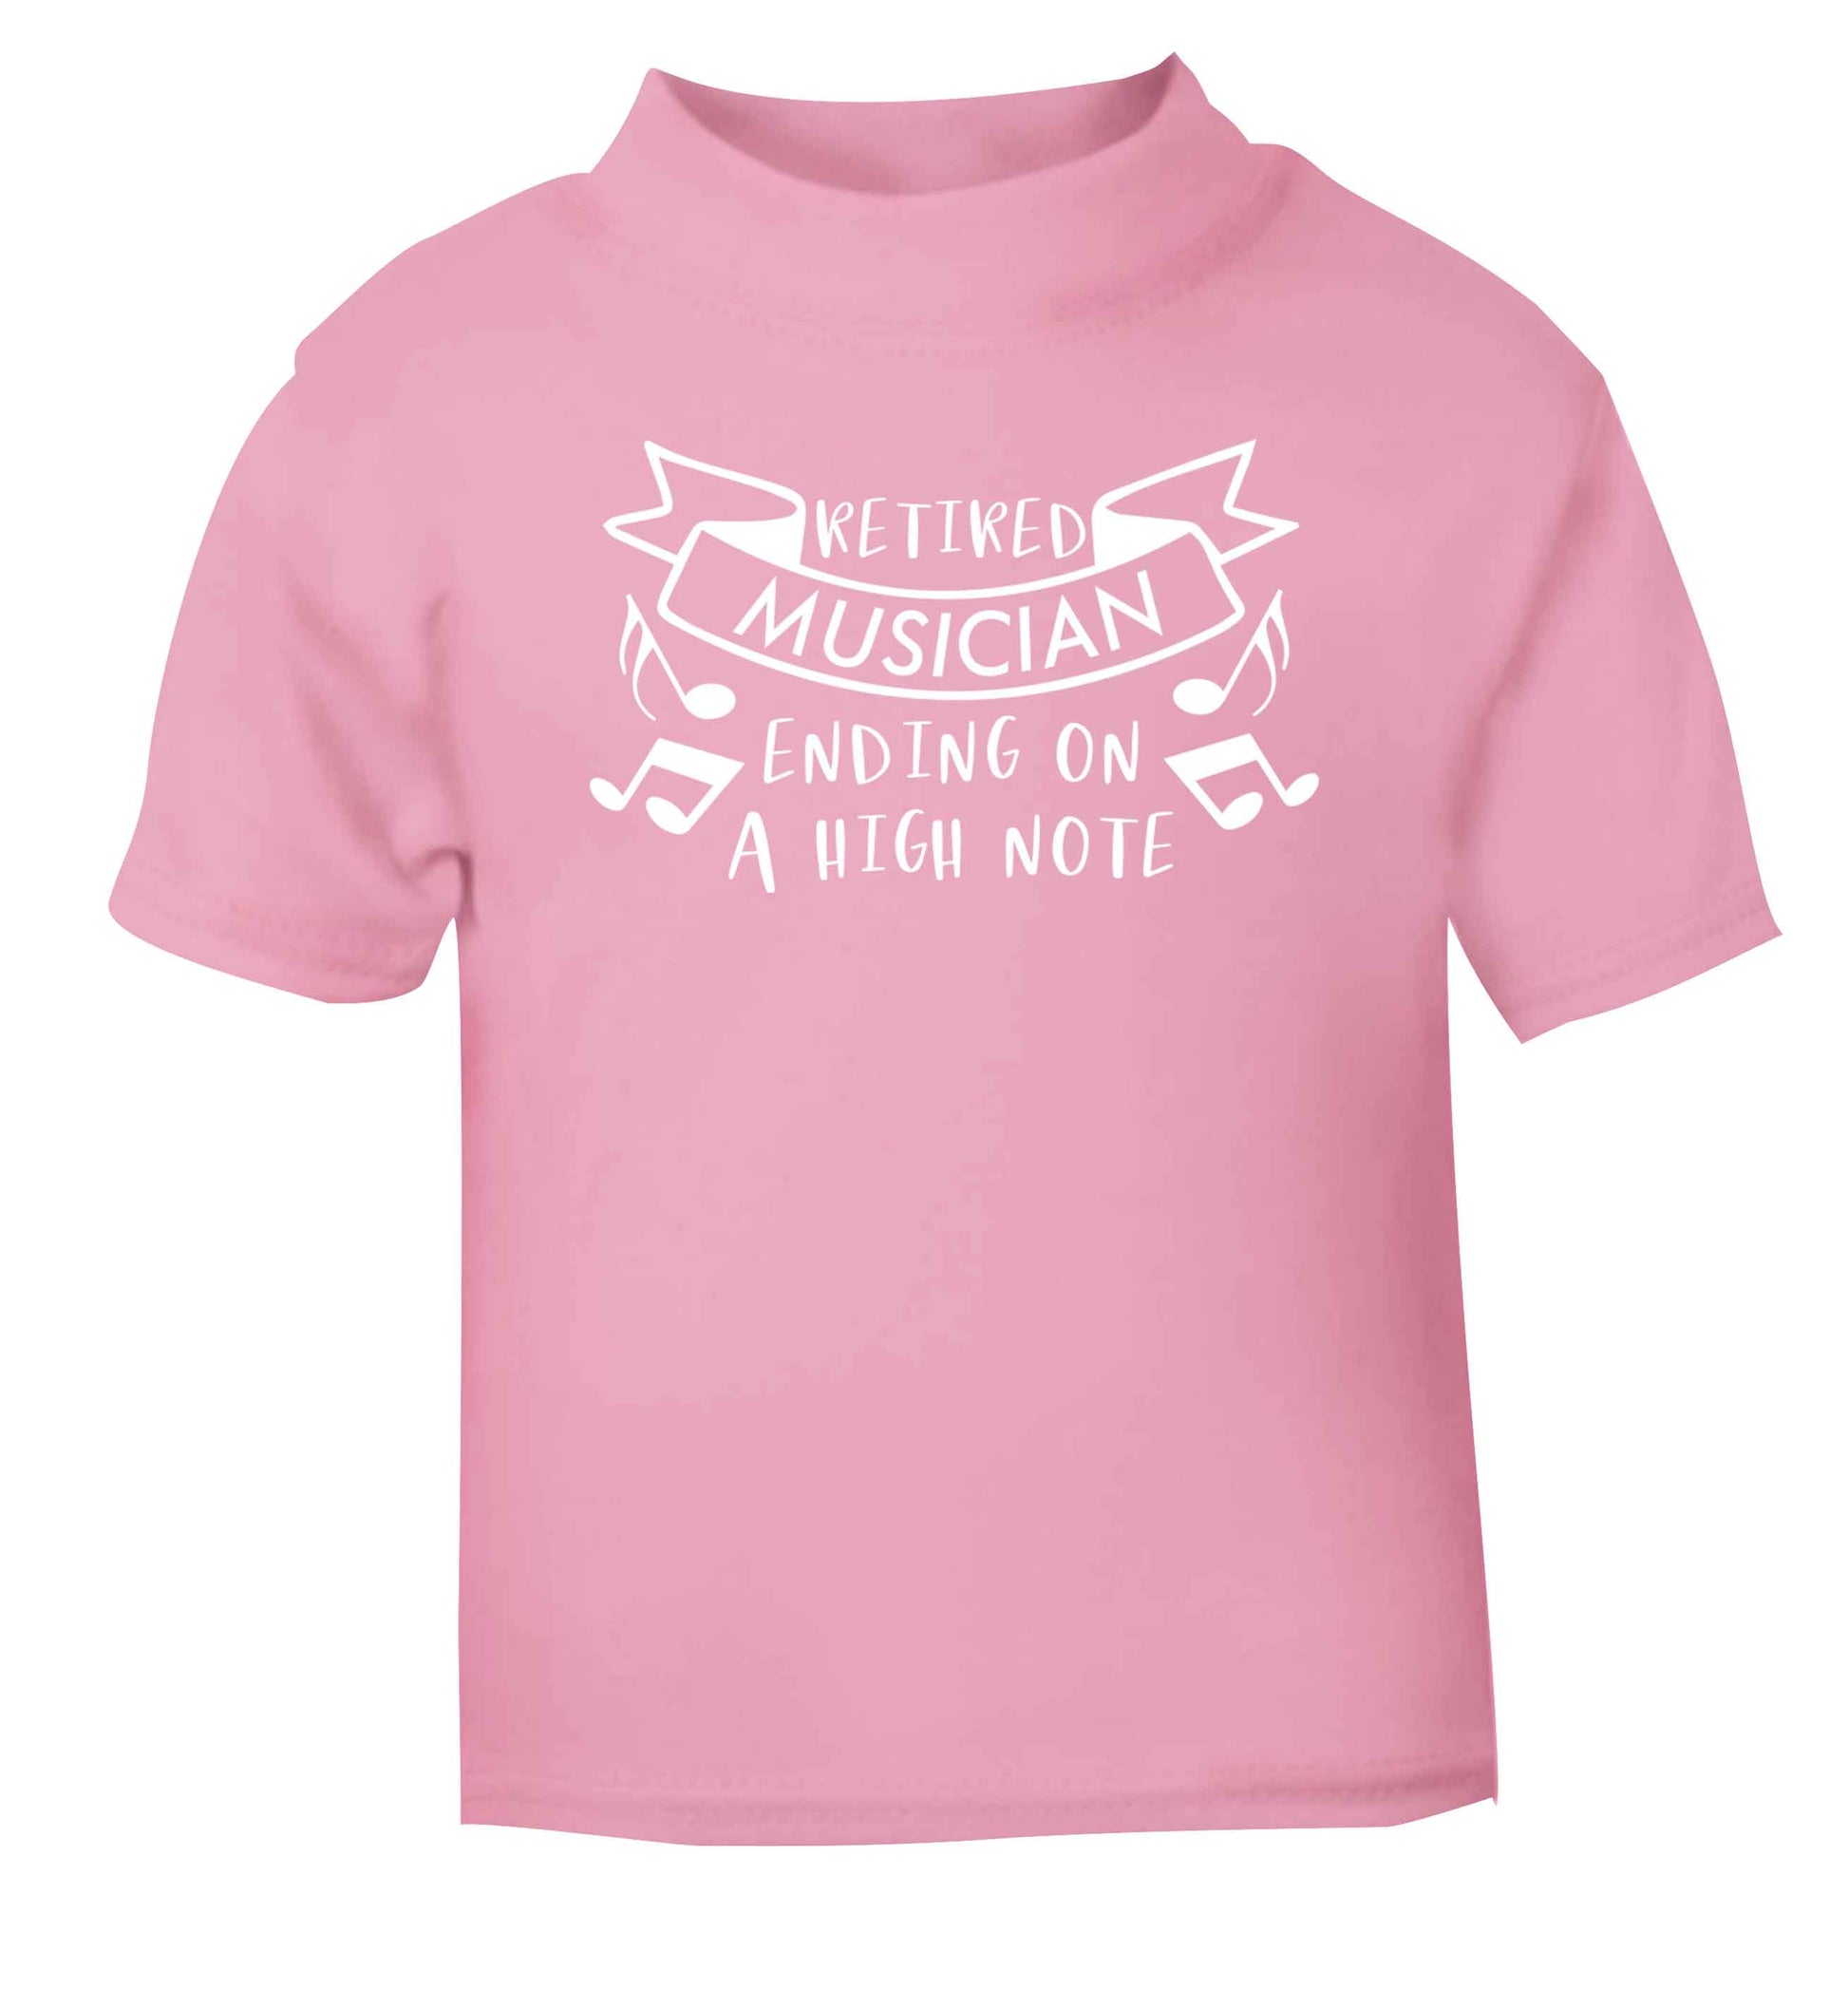 Retired musician ending on a high note light pink Baby Toddler Tshirt 2 Years